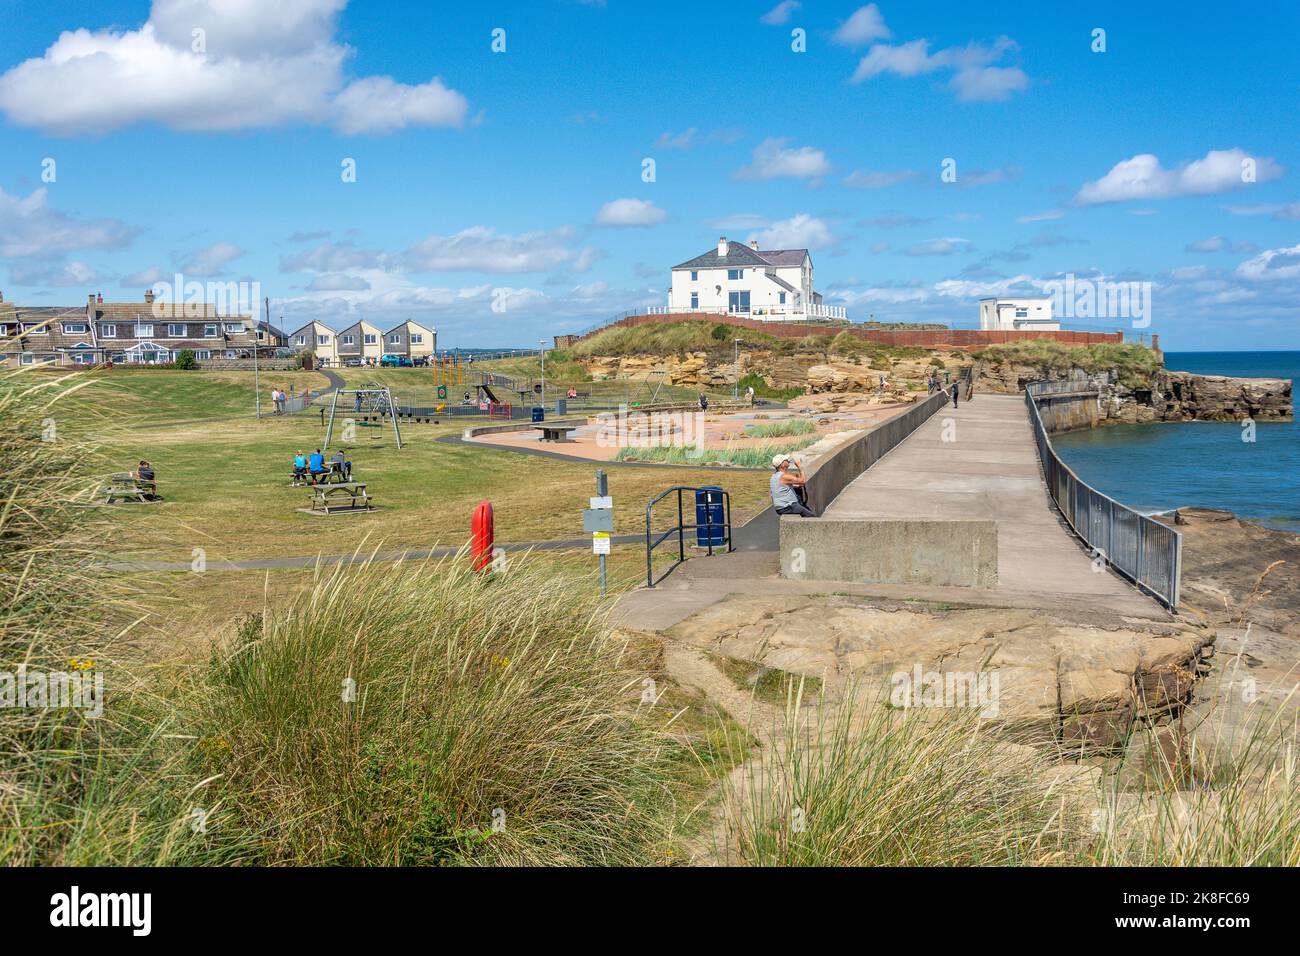 Cliff House and Paddler's Park, amble, Northumberland, Inghilterra, Regno Unito Foto Stock